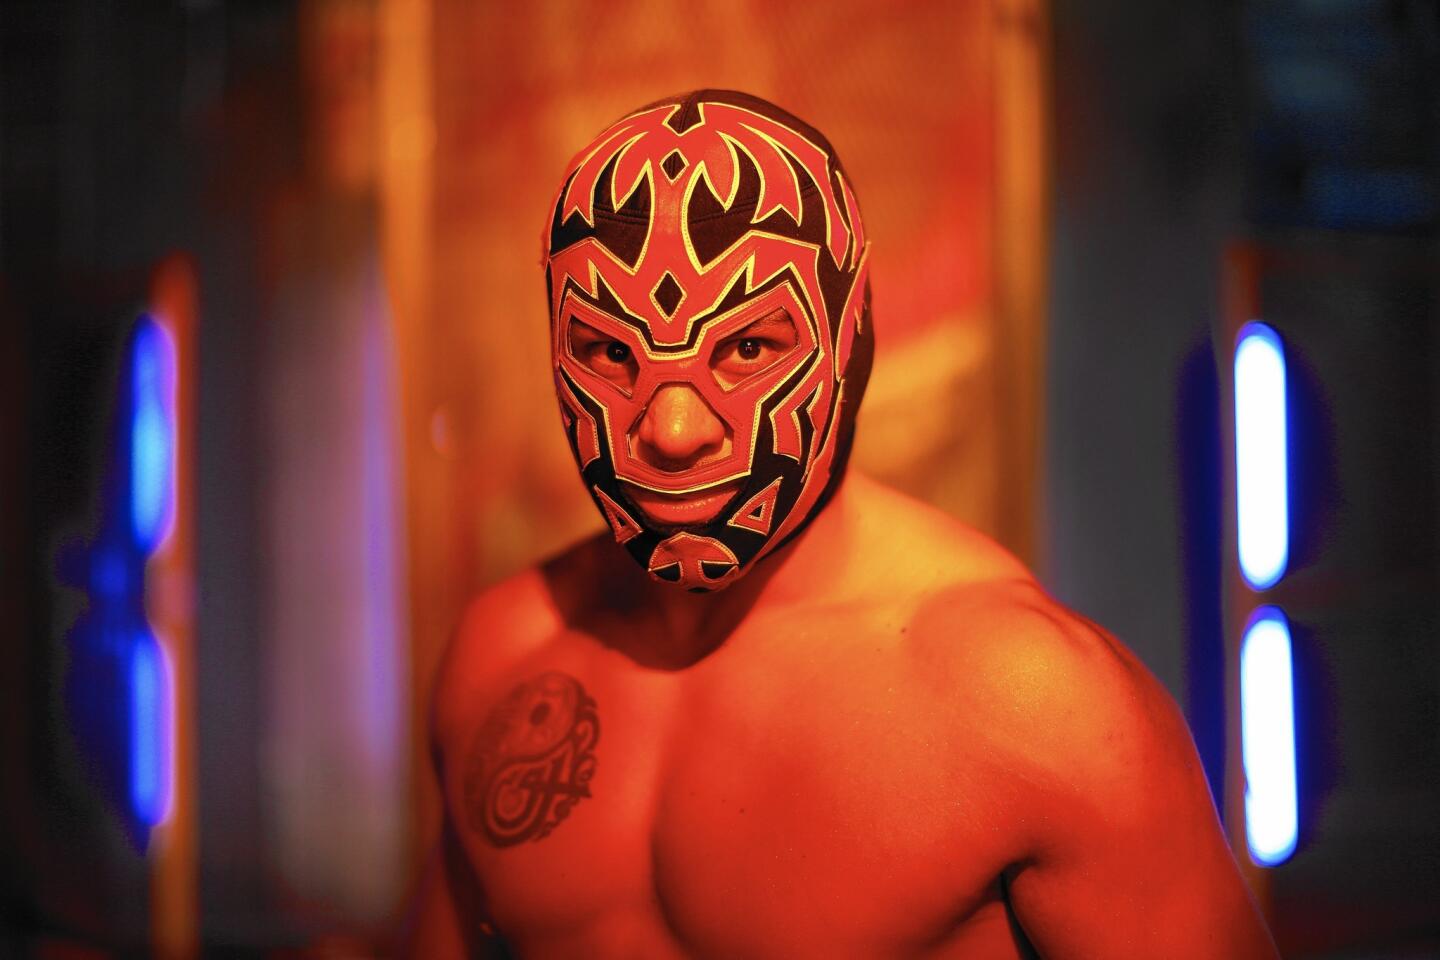 King Cuerno ahead of a bout as part of the "Lucha Underground" wrestling franchise.